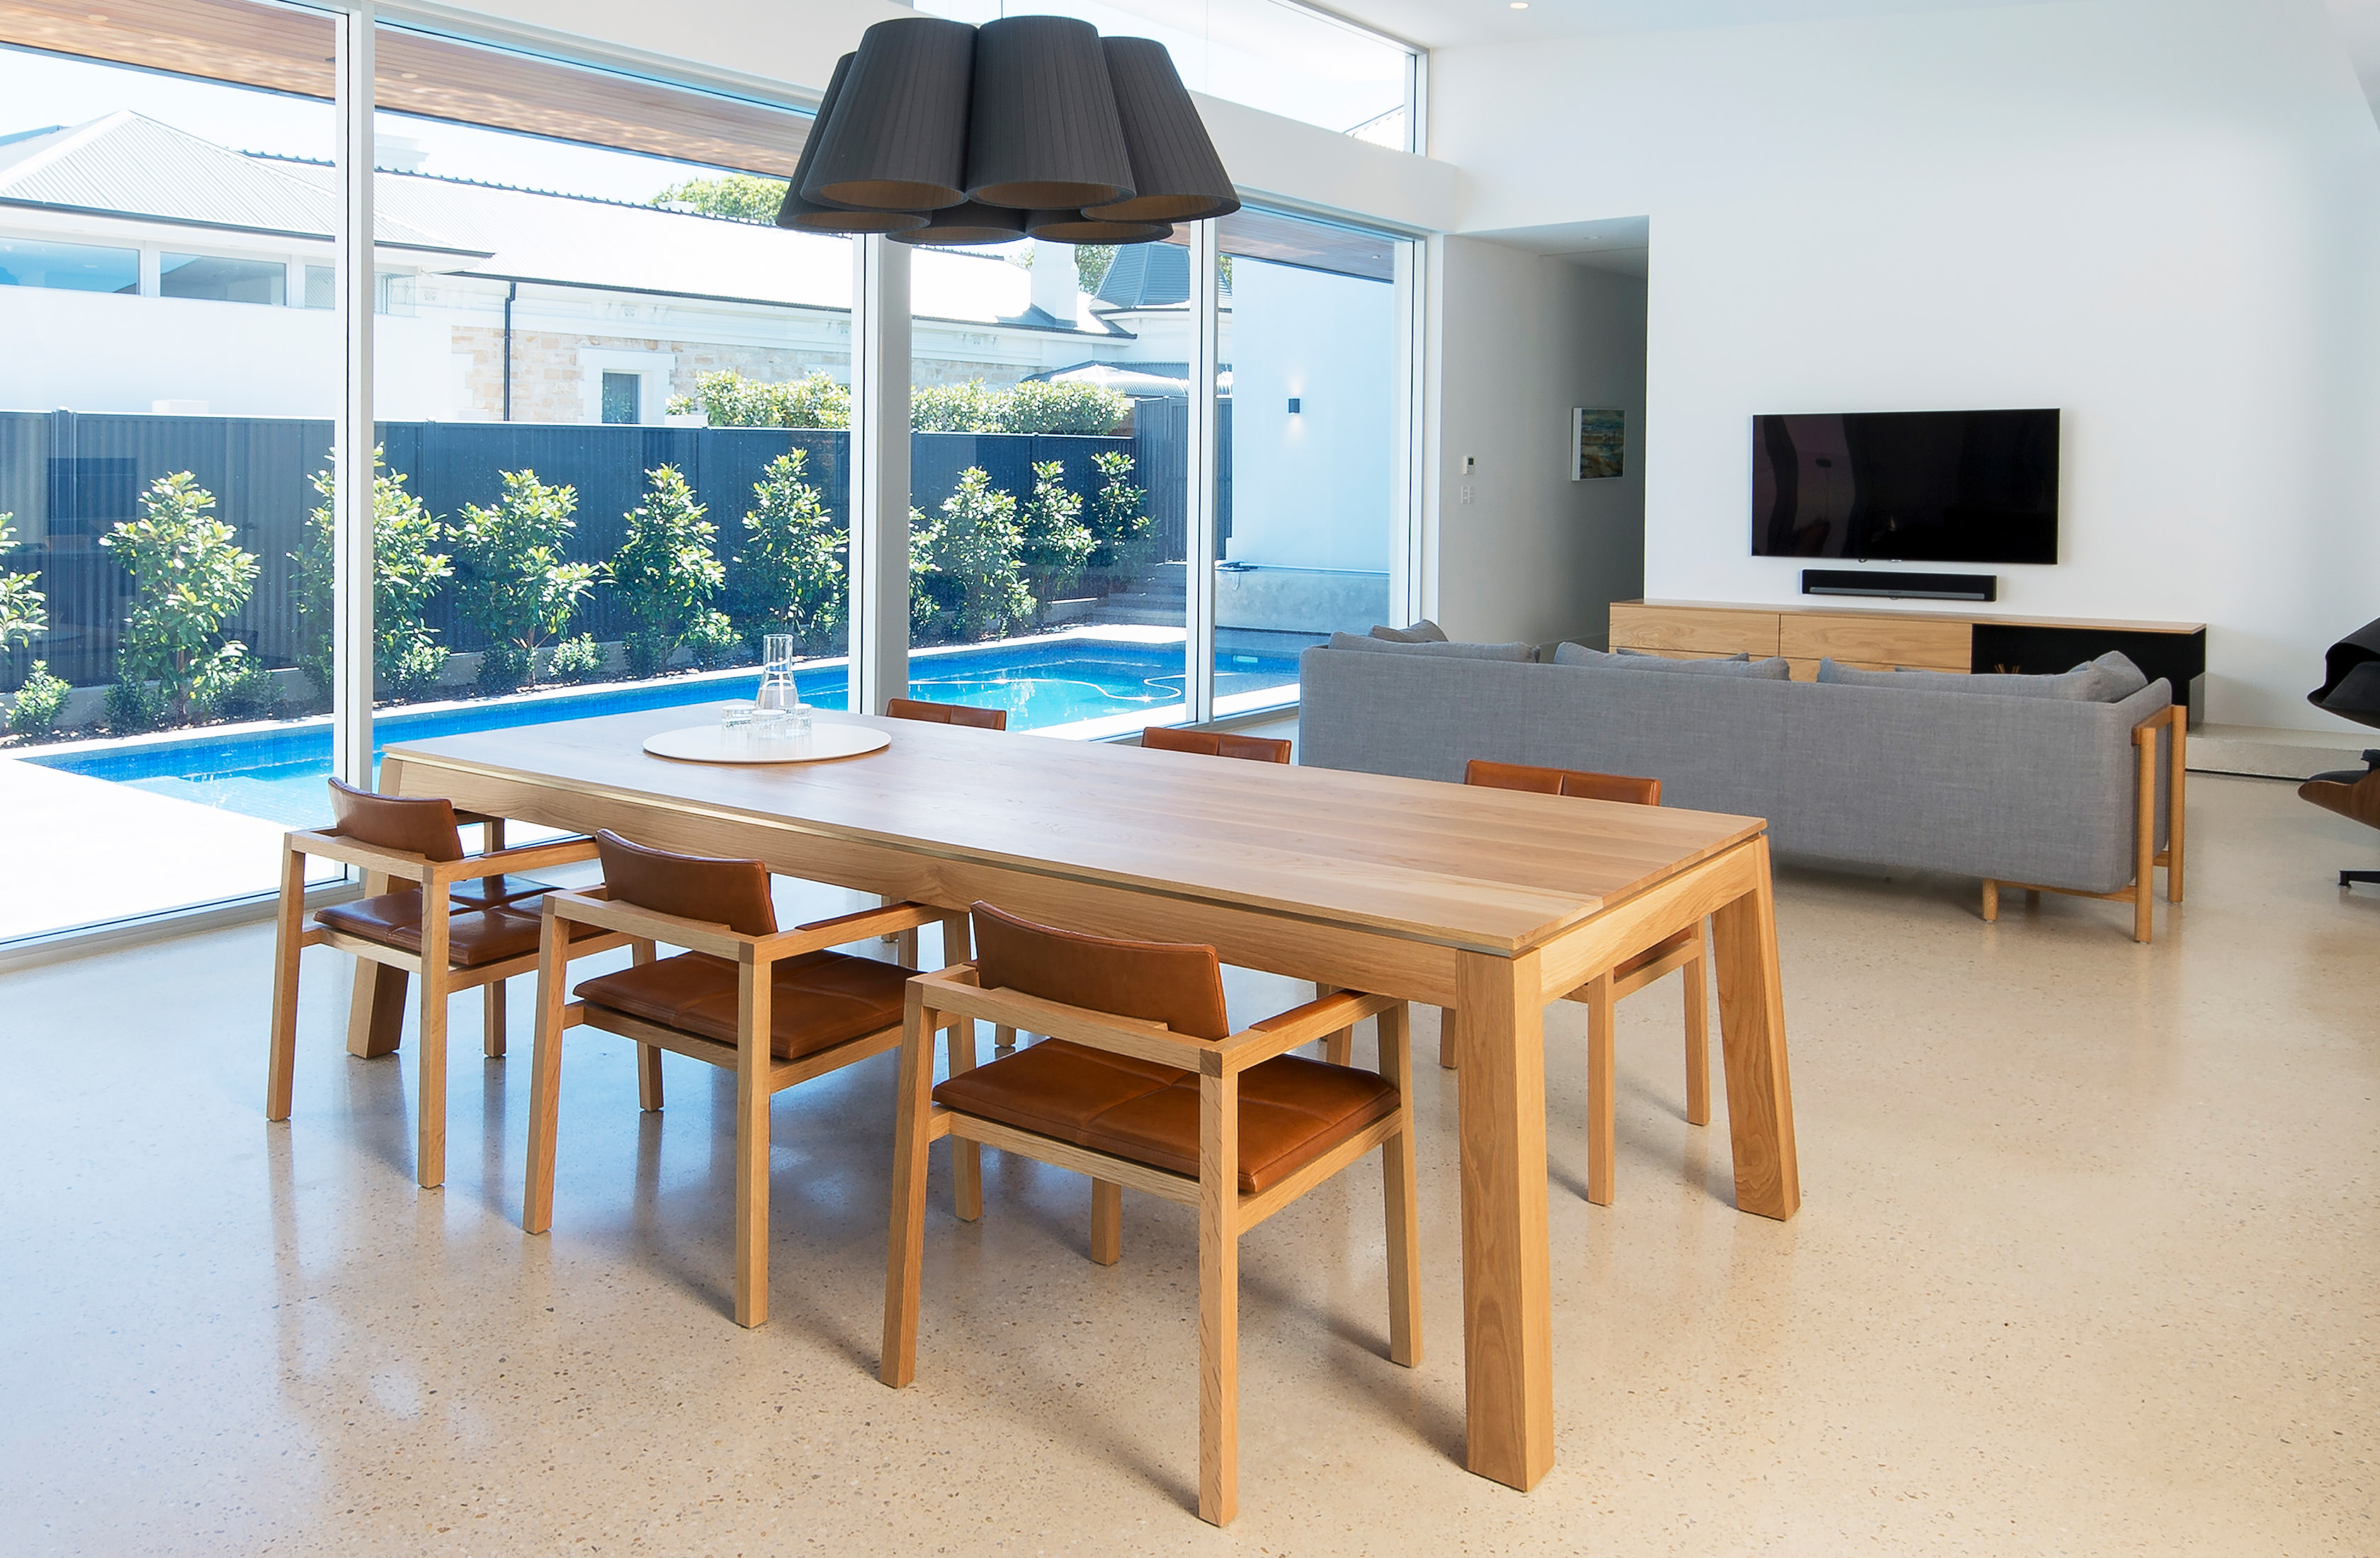 Sweeping view into this modern family home evoking a sense of calm as you move past the solid oak designer dining table by FrancoCrea onwards to the sensation family pool backdrop